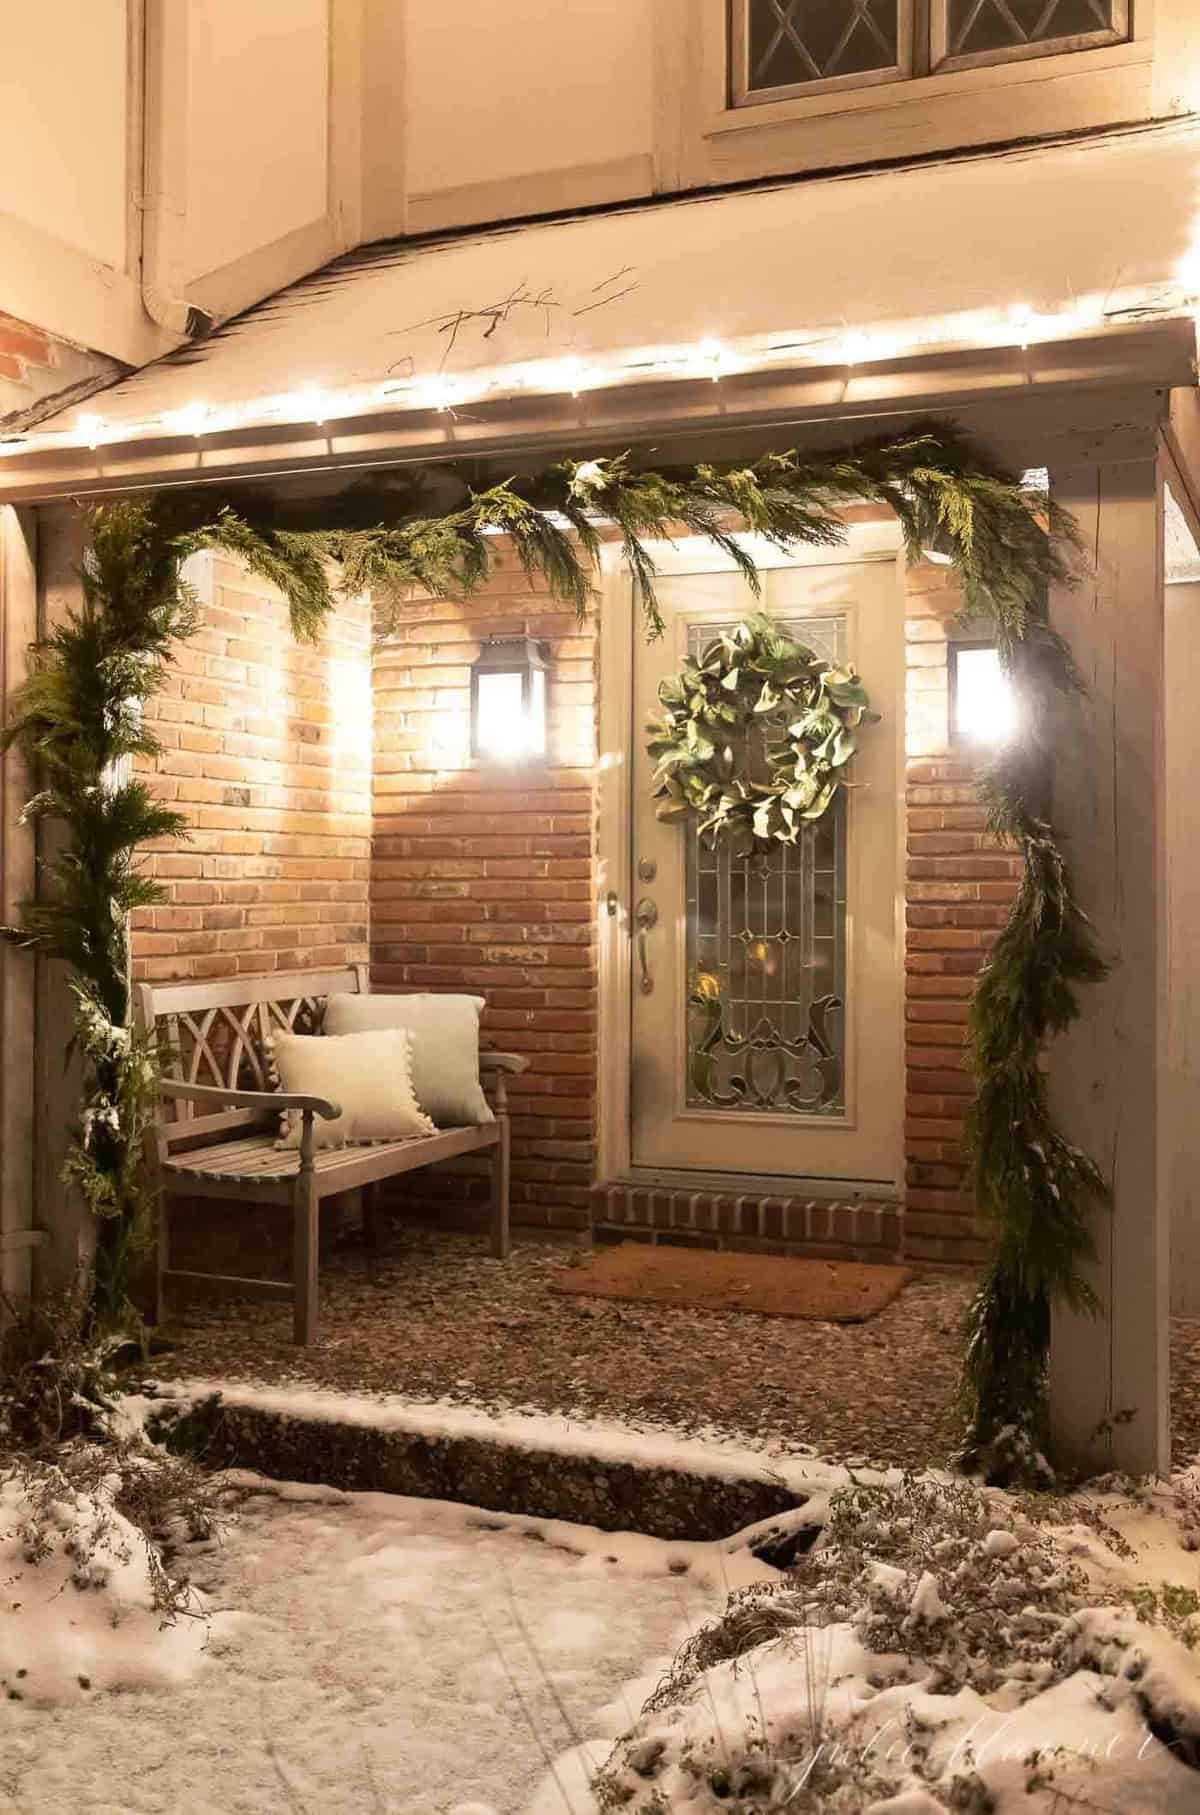 Exterior of a home, snow on the ground and greenery garland on posts for Christmas.